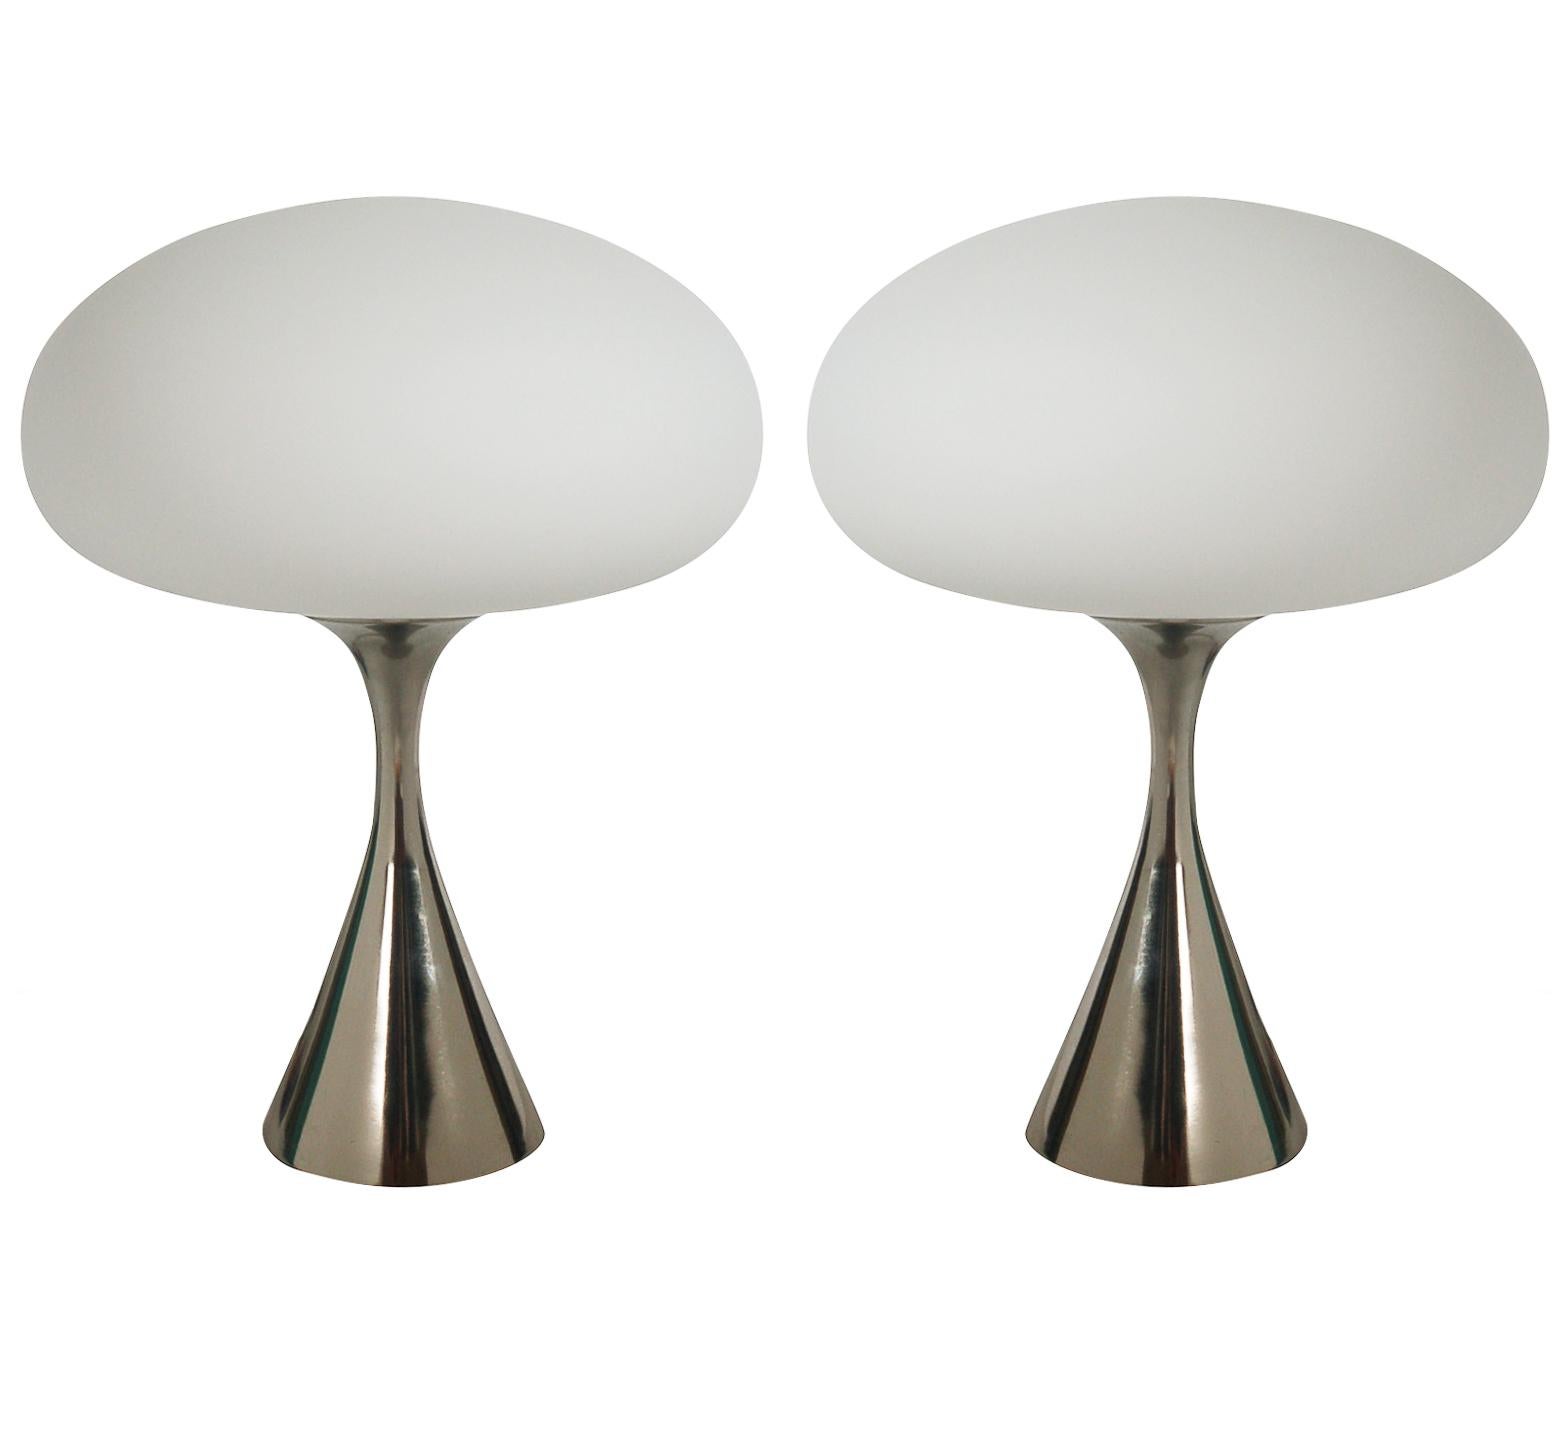 Late 20th Century Pair of Mid-Century Modern Laurel Mushroom Table Lamps in Chrome / Silver